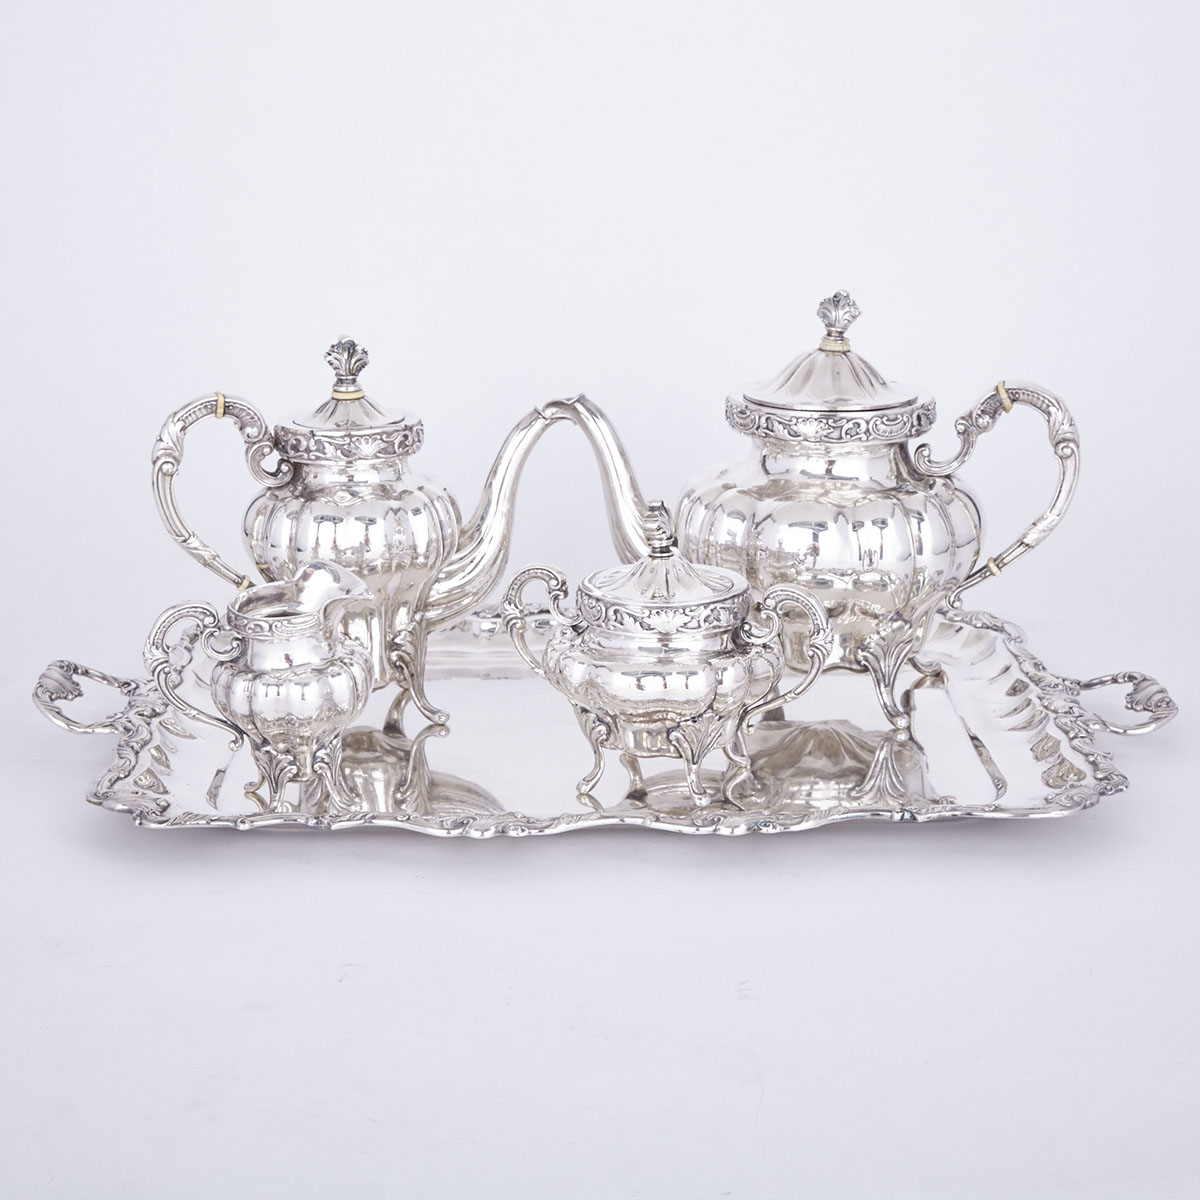 Austro-Hungarian Silver Tea and Coffee Service, Pest, c.1900